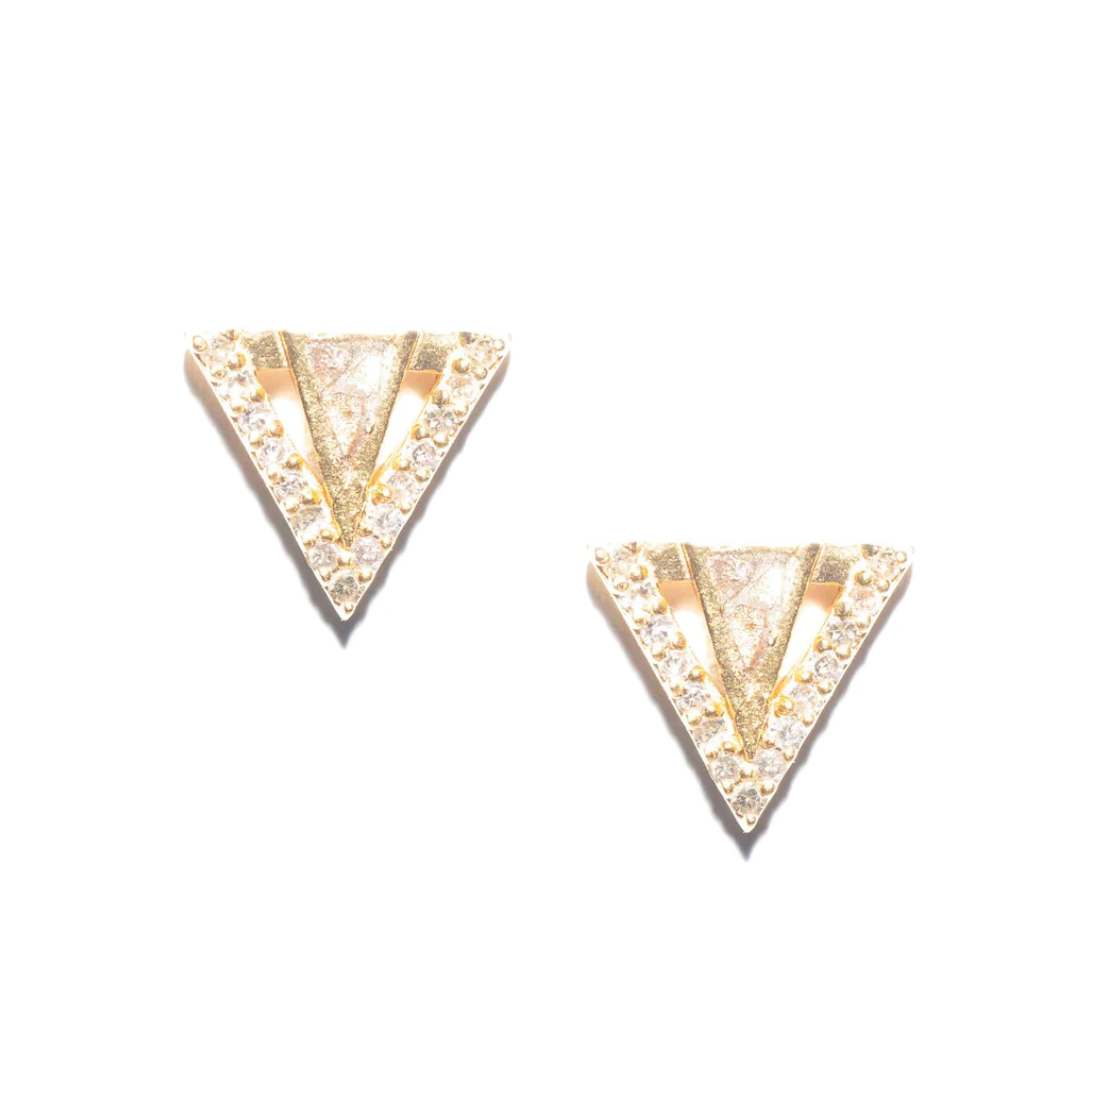 Load image into Gallery viewer, triangle shaped stud earrings with crushed diamonds set in resin and champagne diamond pave accents on white background
